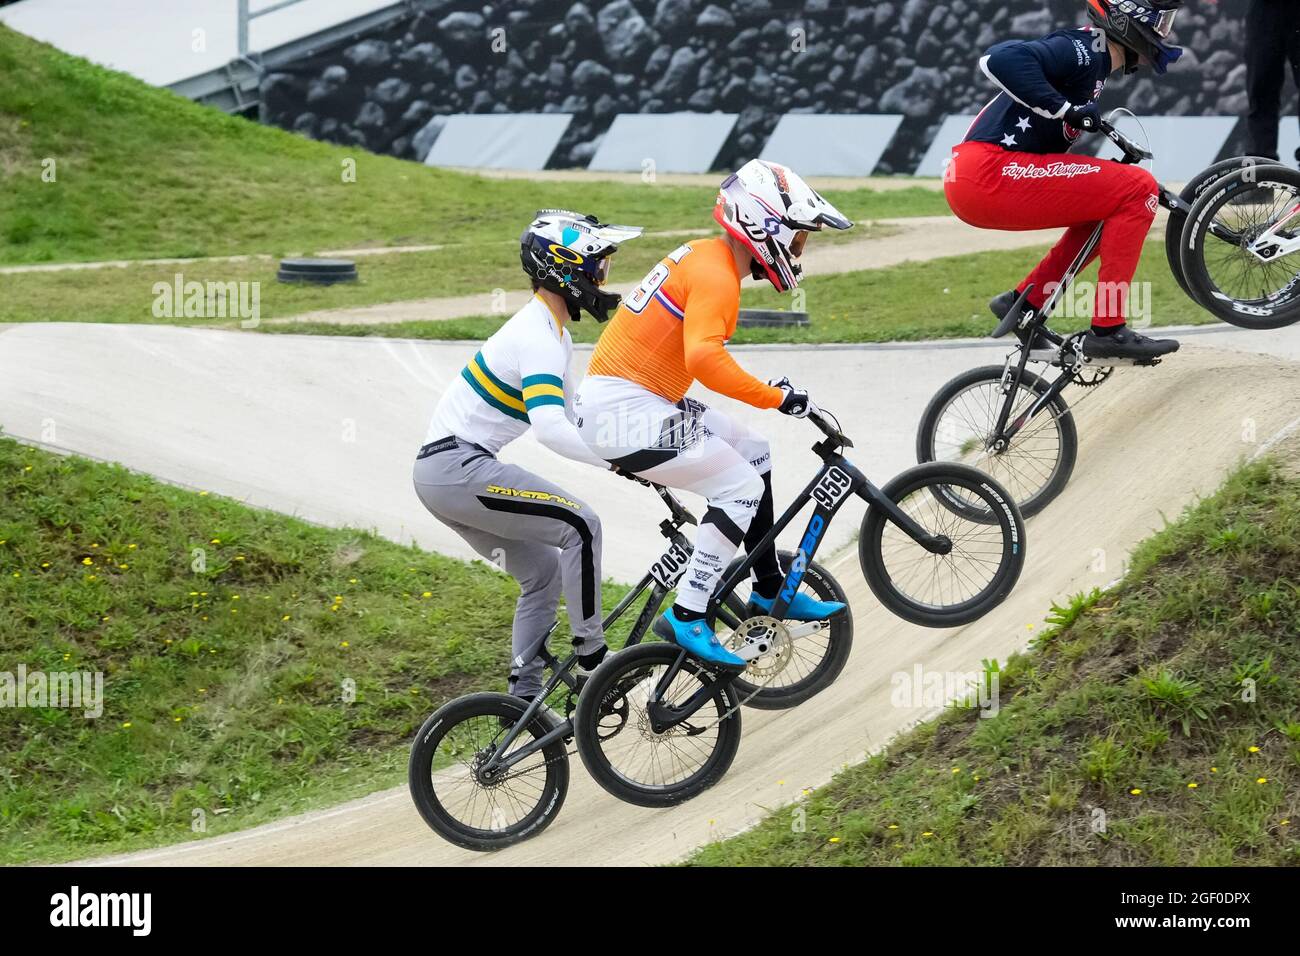 Arnhem, Netherlands. 22nd Aug, 2021. ARNHEM, NETHERLANDS - AUGUST 22:  Mitchel Schotman of the Netherlands competes in final during the 2021 UCI  BMX World Championships at Papendal on August 22, 2021 in